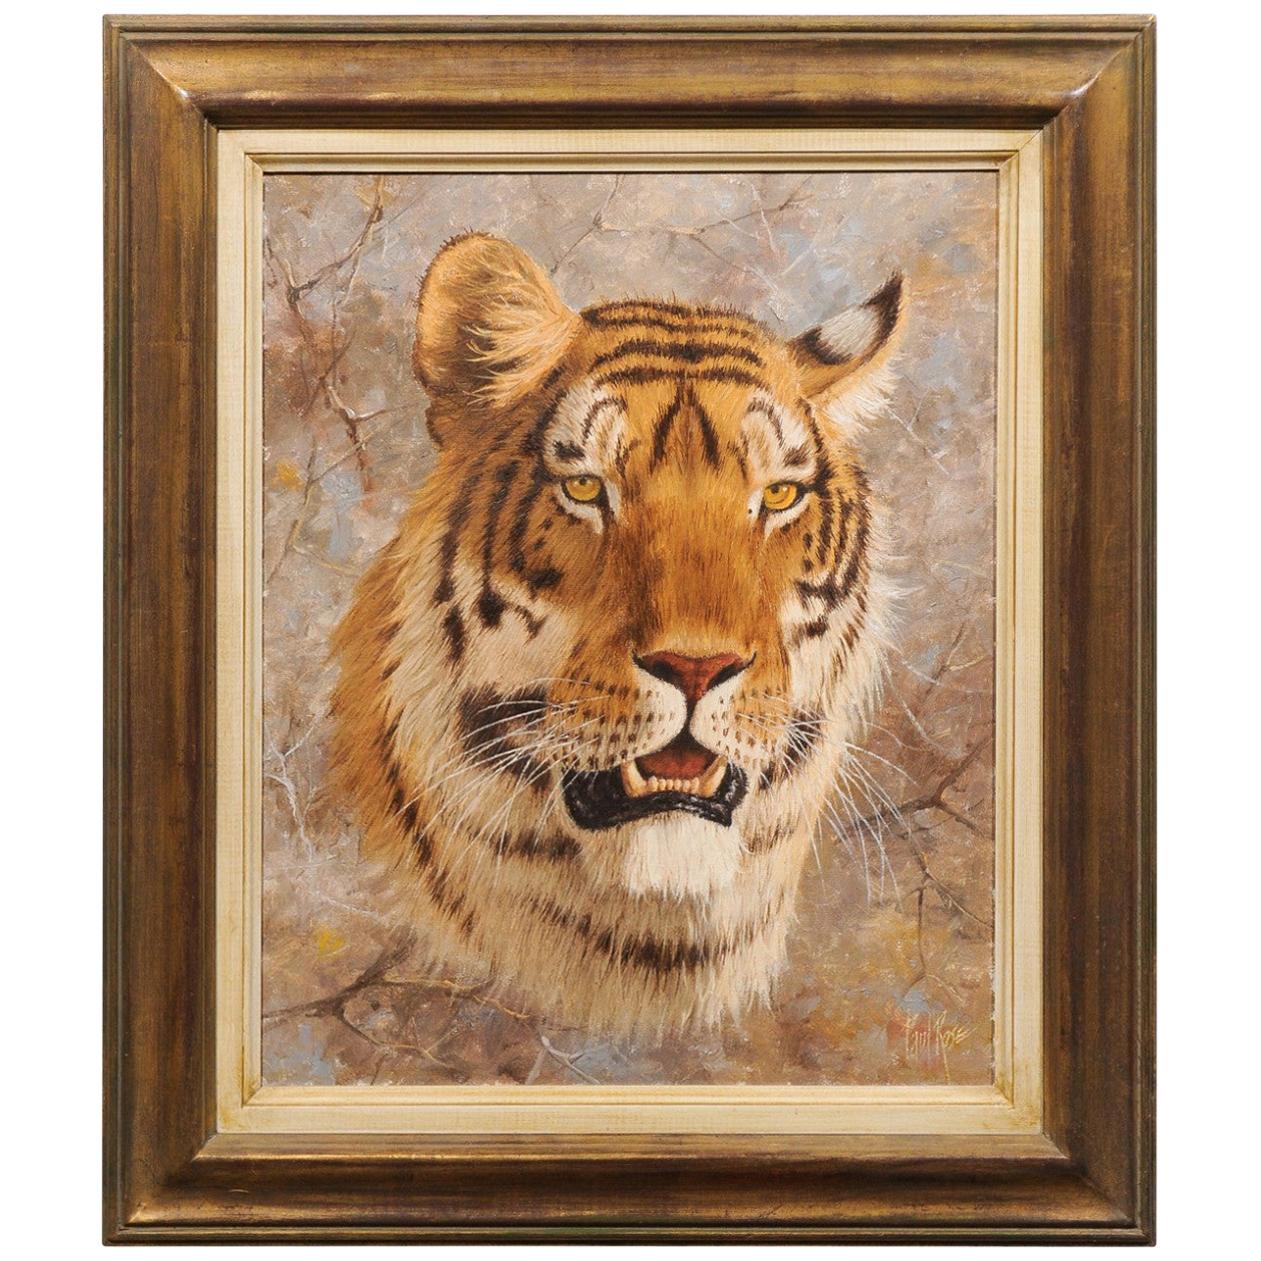 Original Paul Rose Framed and Signed Wildlife Painting Depicting a Tiger Head